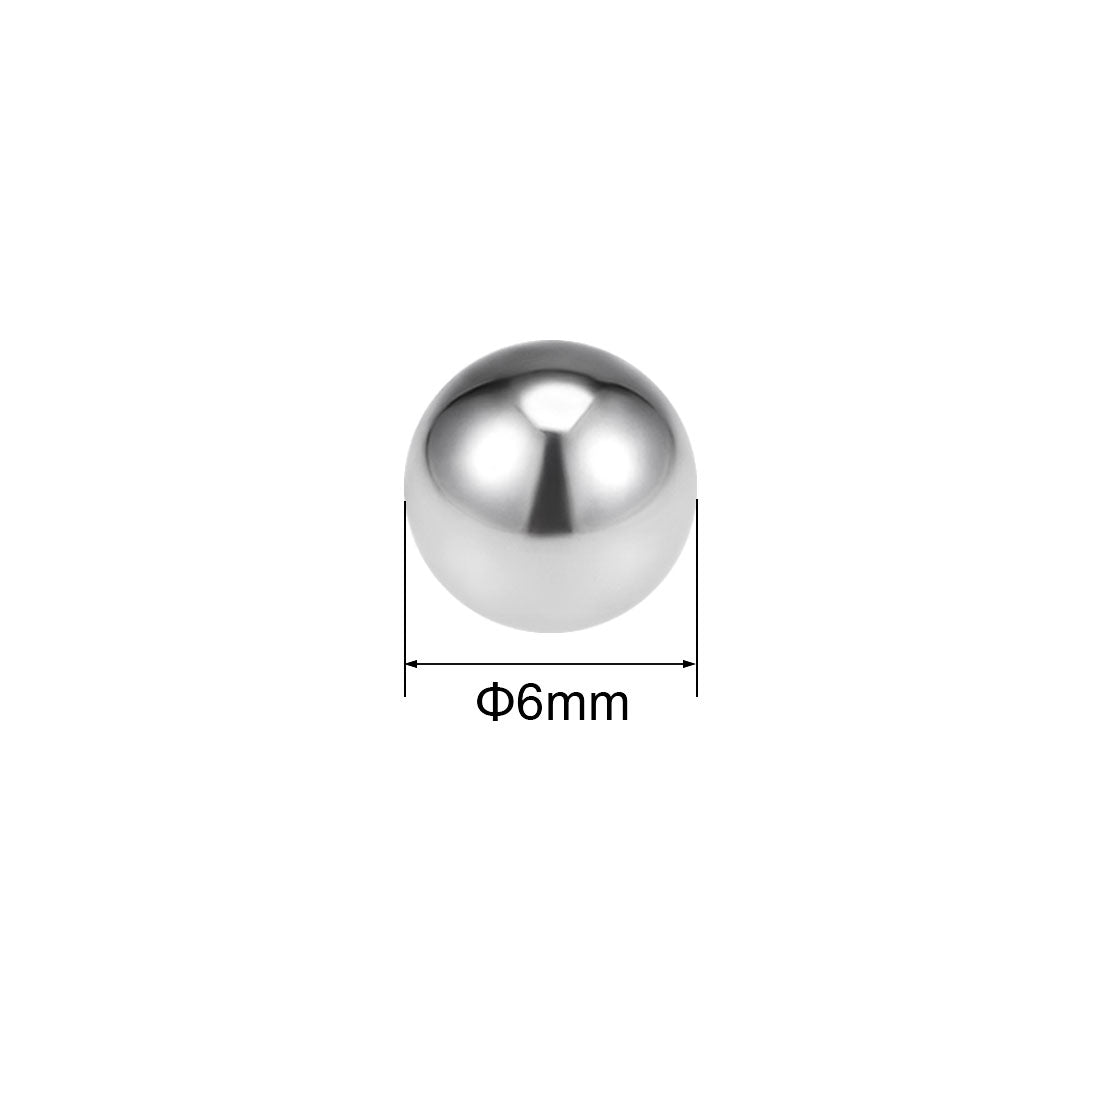 uxcell Uxcell 6mm Bearing Balls 316L Stainless Steel G100 Precision Balls 100pcs